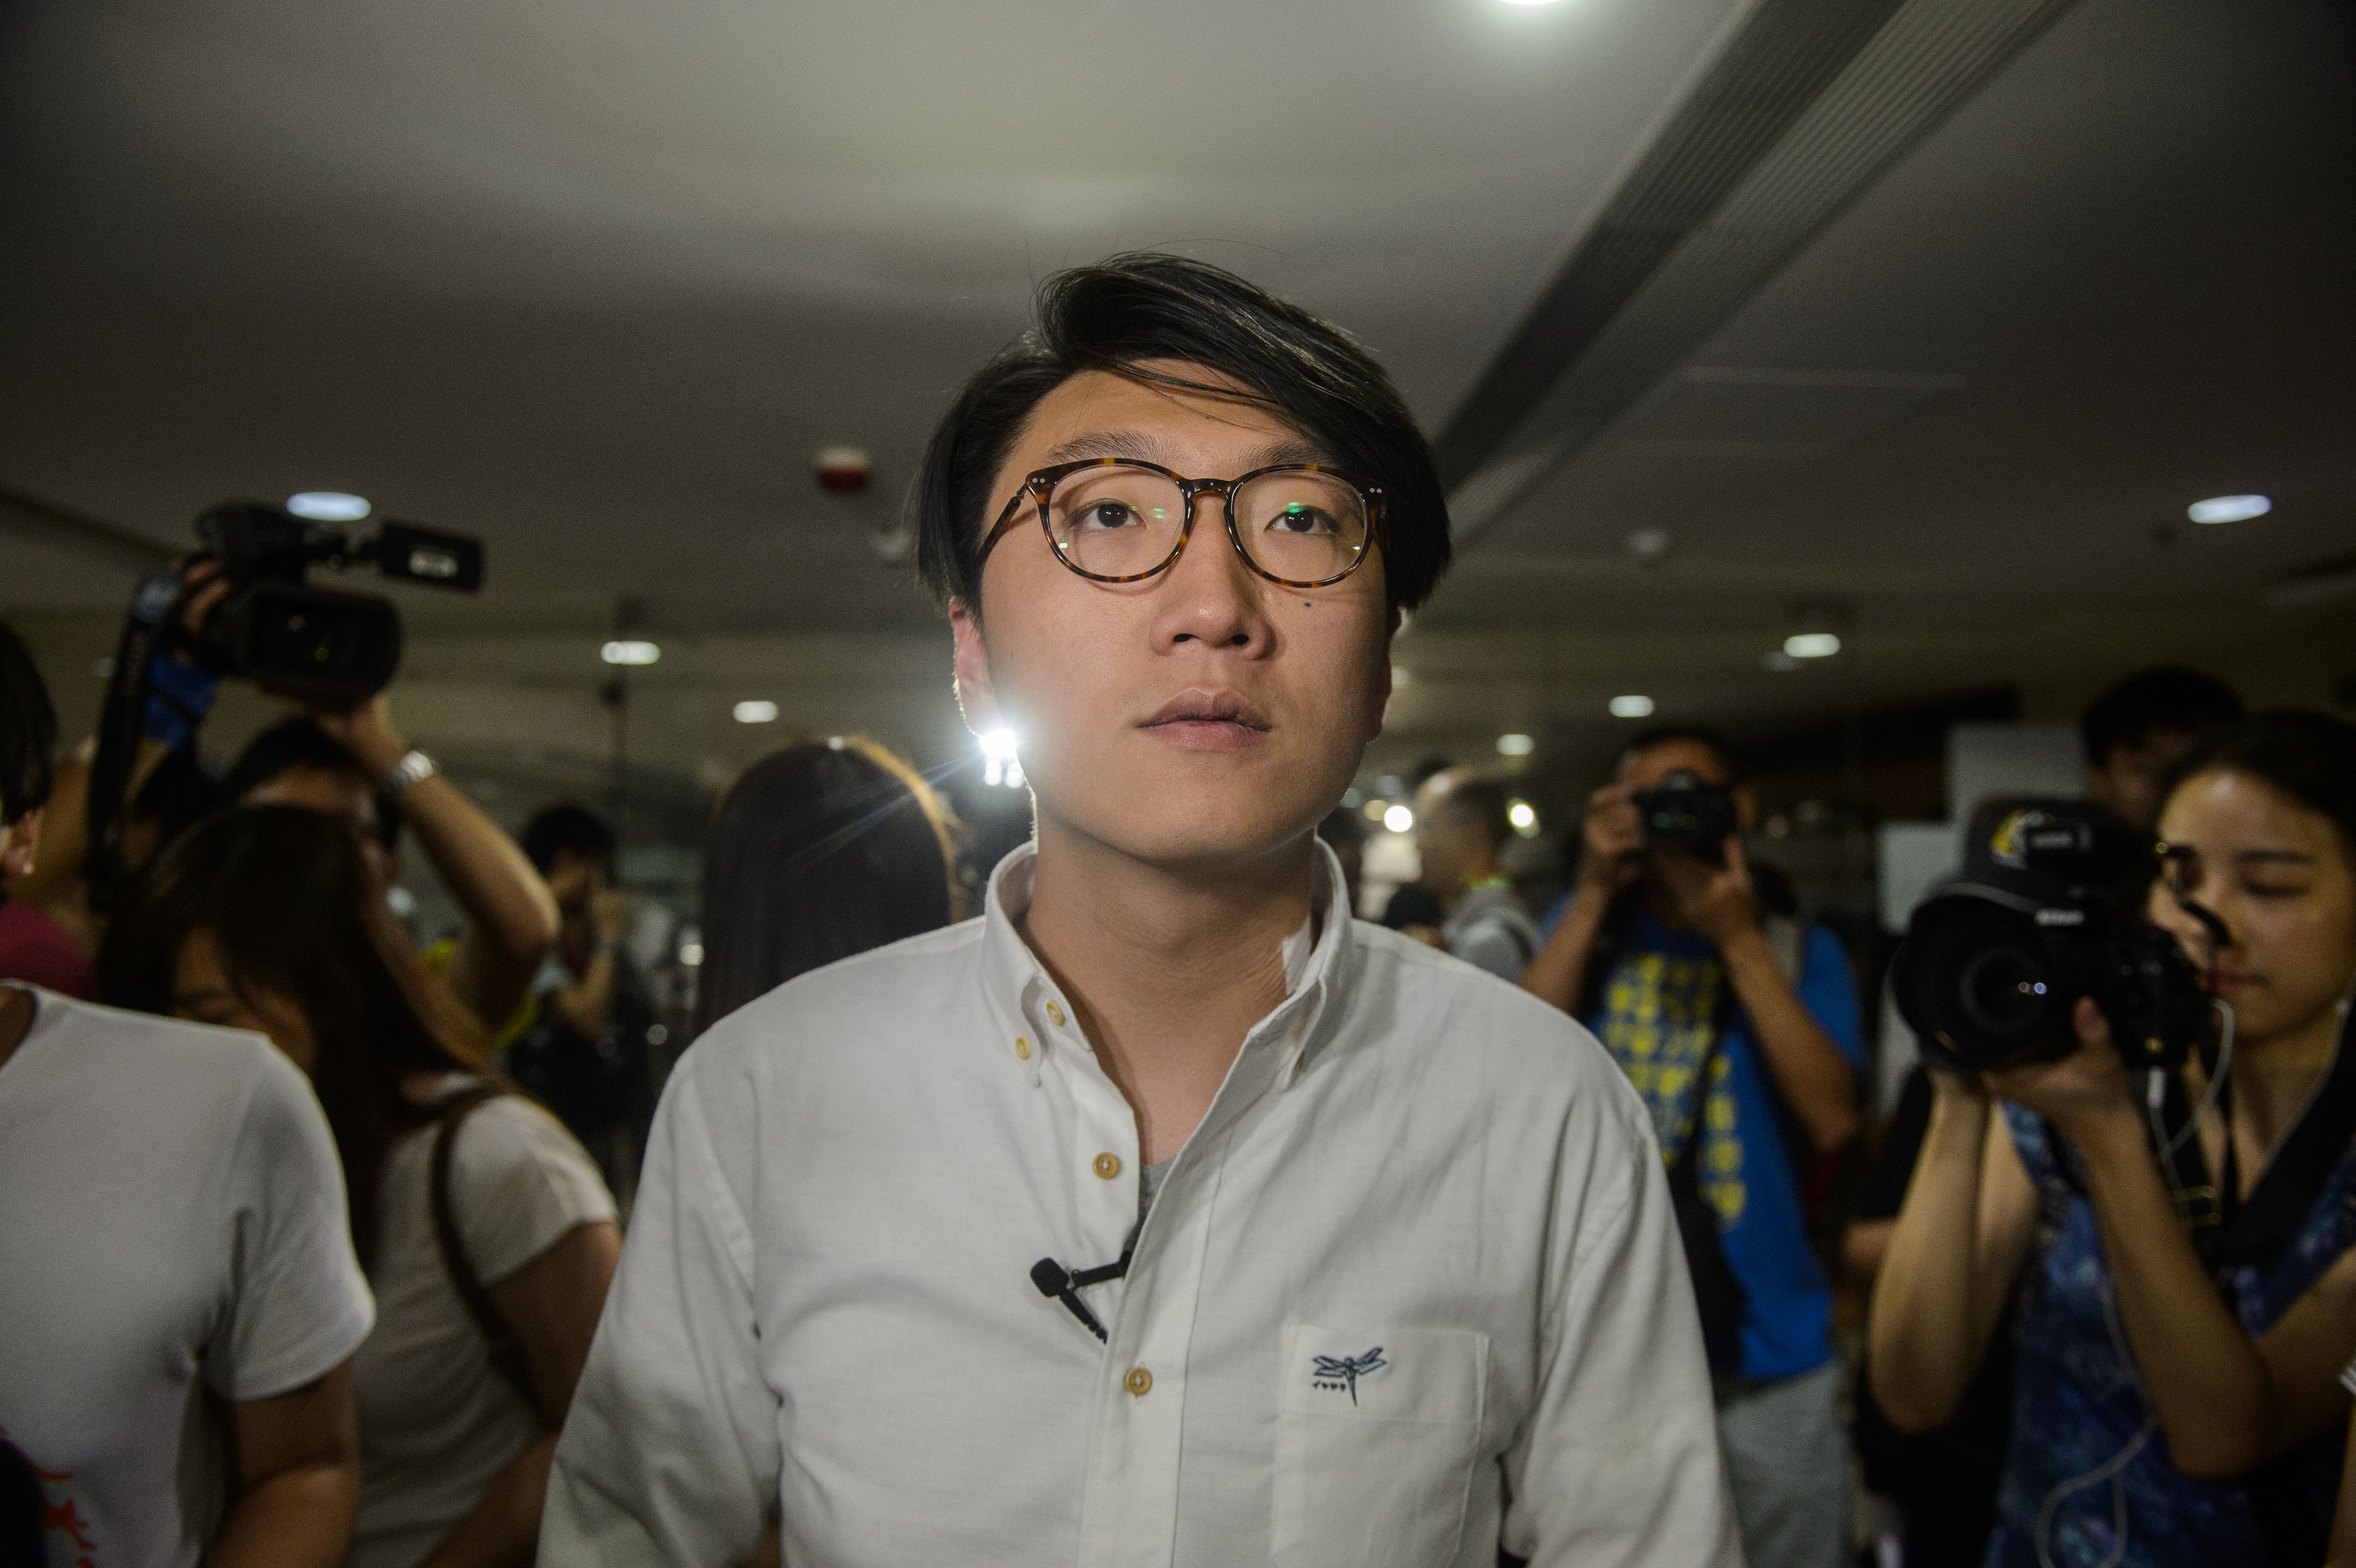 Edward Leung of the Hong Kong Indigenous party, arrives at the 2016 Legislative Council Election Briefing for Candidates in Hong Kong on August 2, 2016. (Anthony Wallace—AFP/Getty Images)